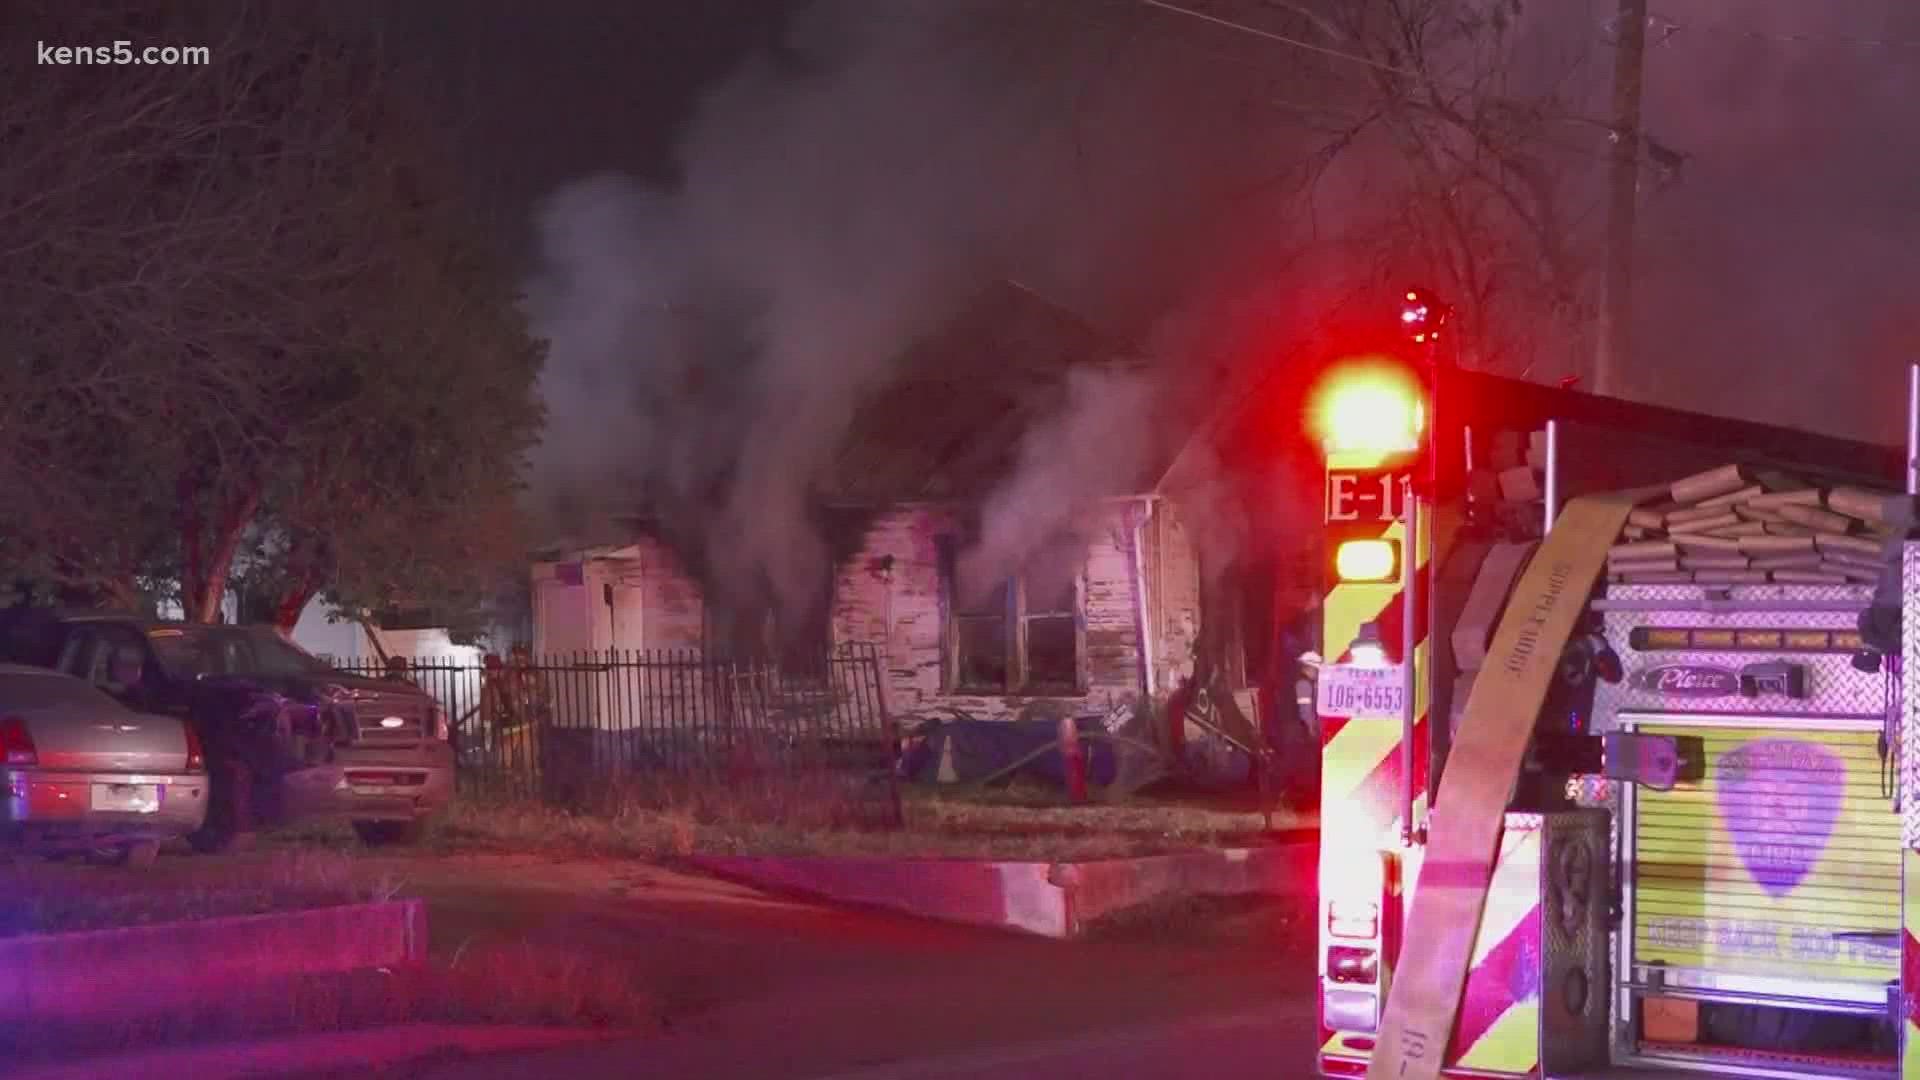 A home with a 'this house is not on fire' sign catches fire Monday morning and is completely destroyed, officials say.